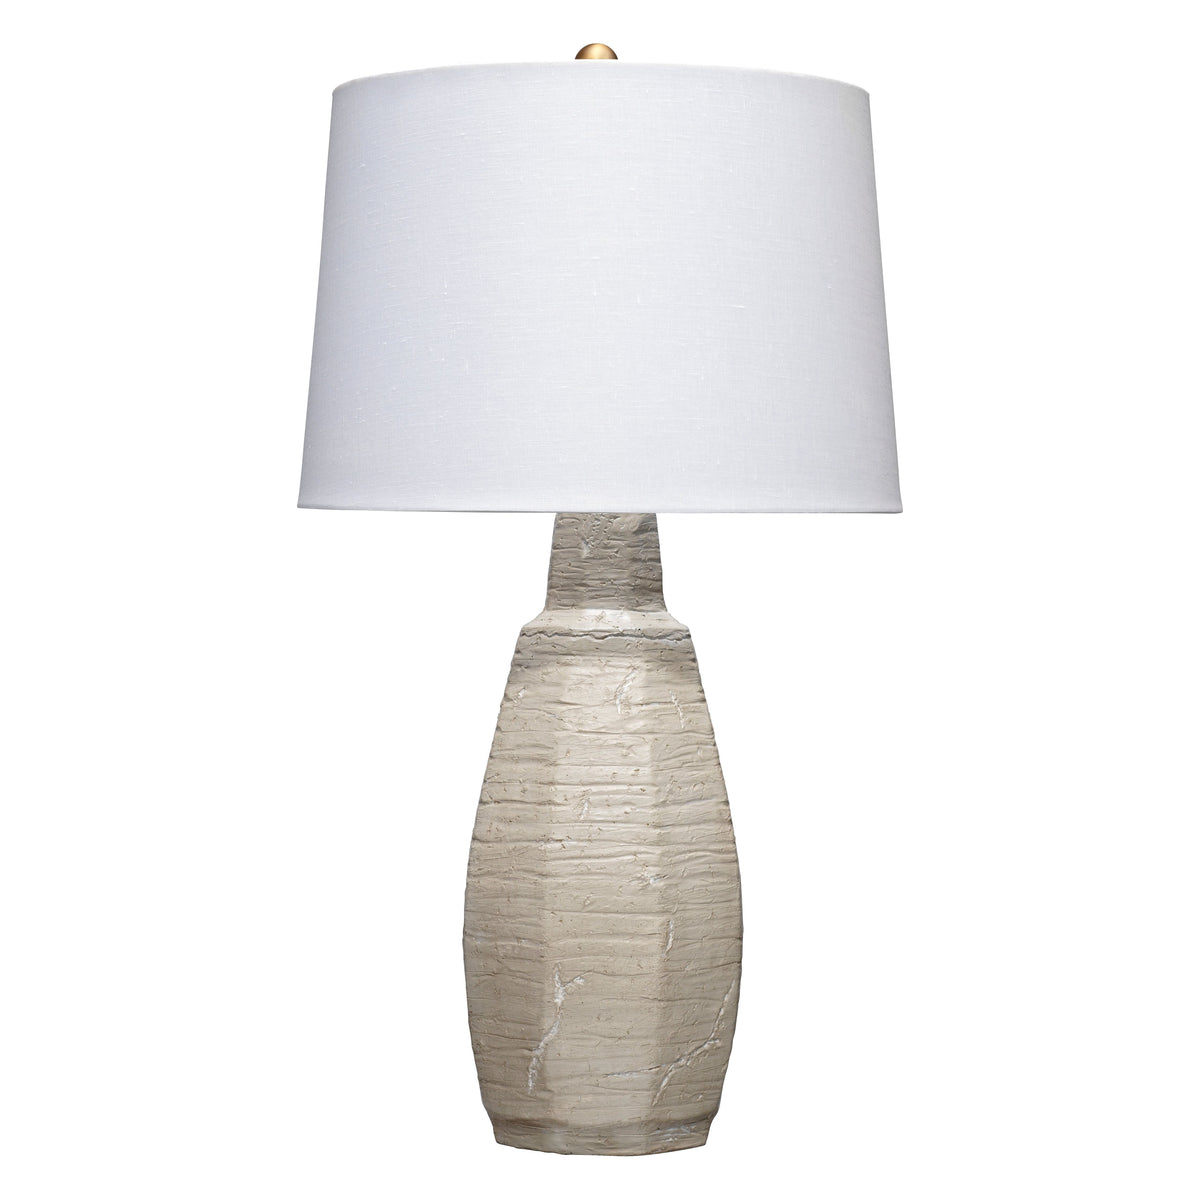 Jamie Young Company - LS9PARCHEDGR - Parched Table Lamp - Parched - Grey